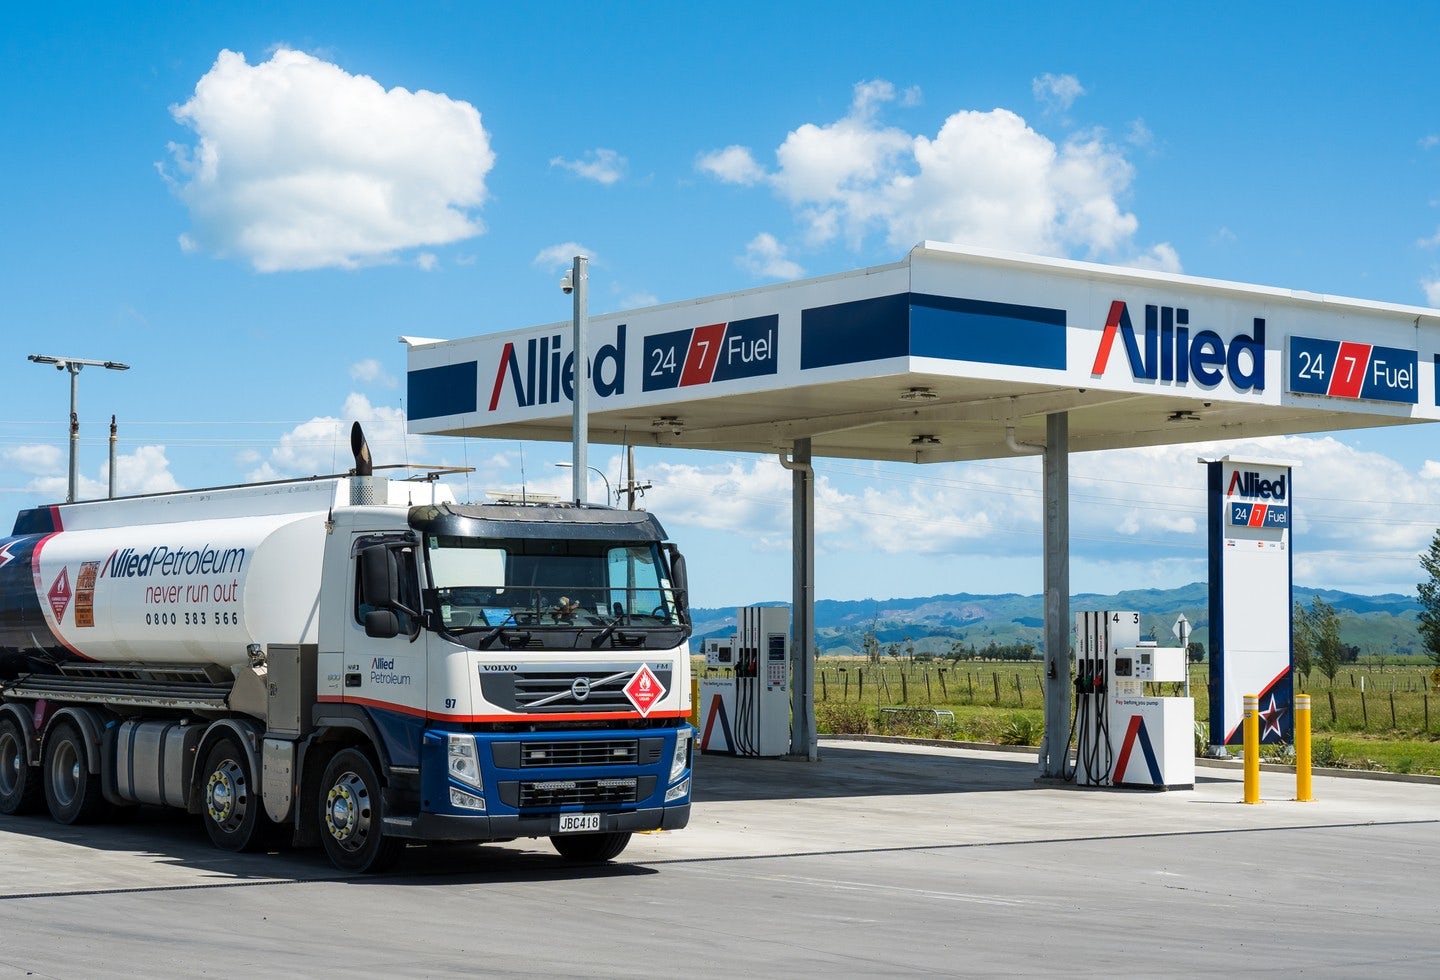 Allied Petroleum fuel truck at fuel station